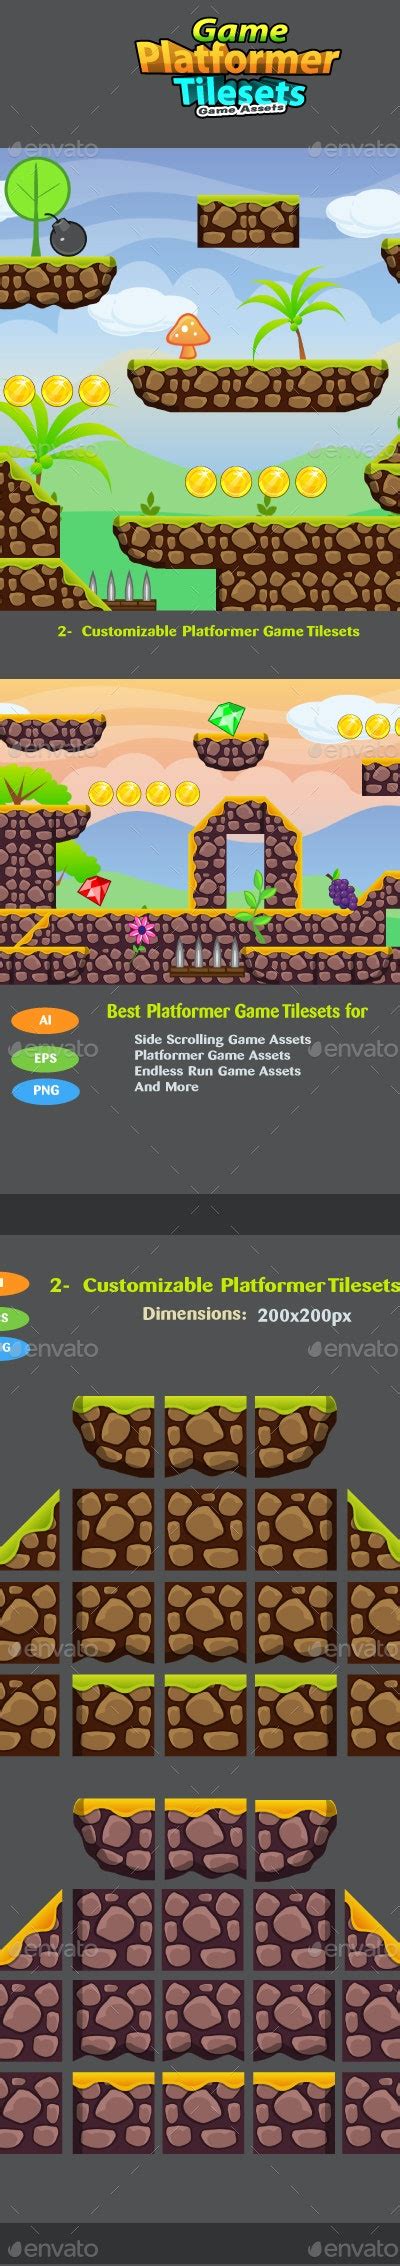 2d Game Platformer Tilesets 23 By Pasilan Graphicriver